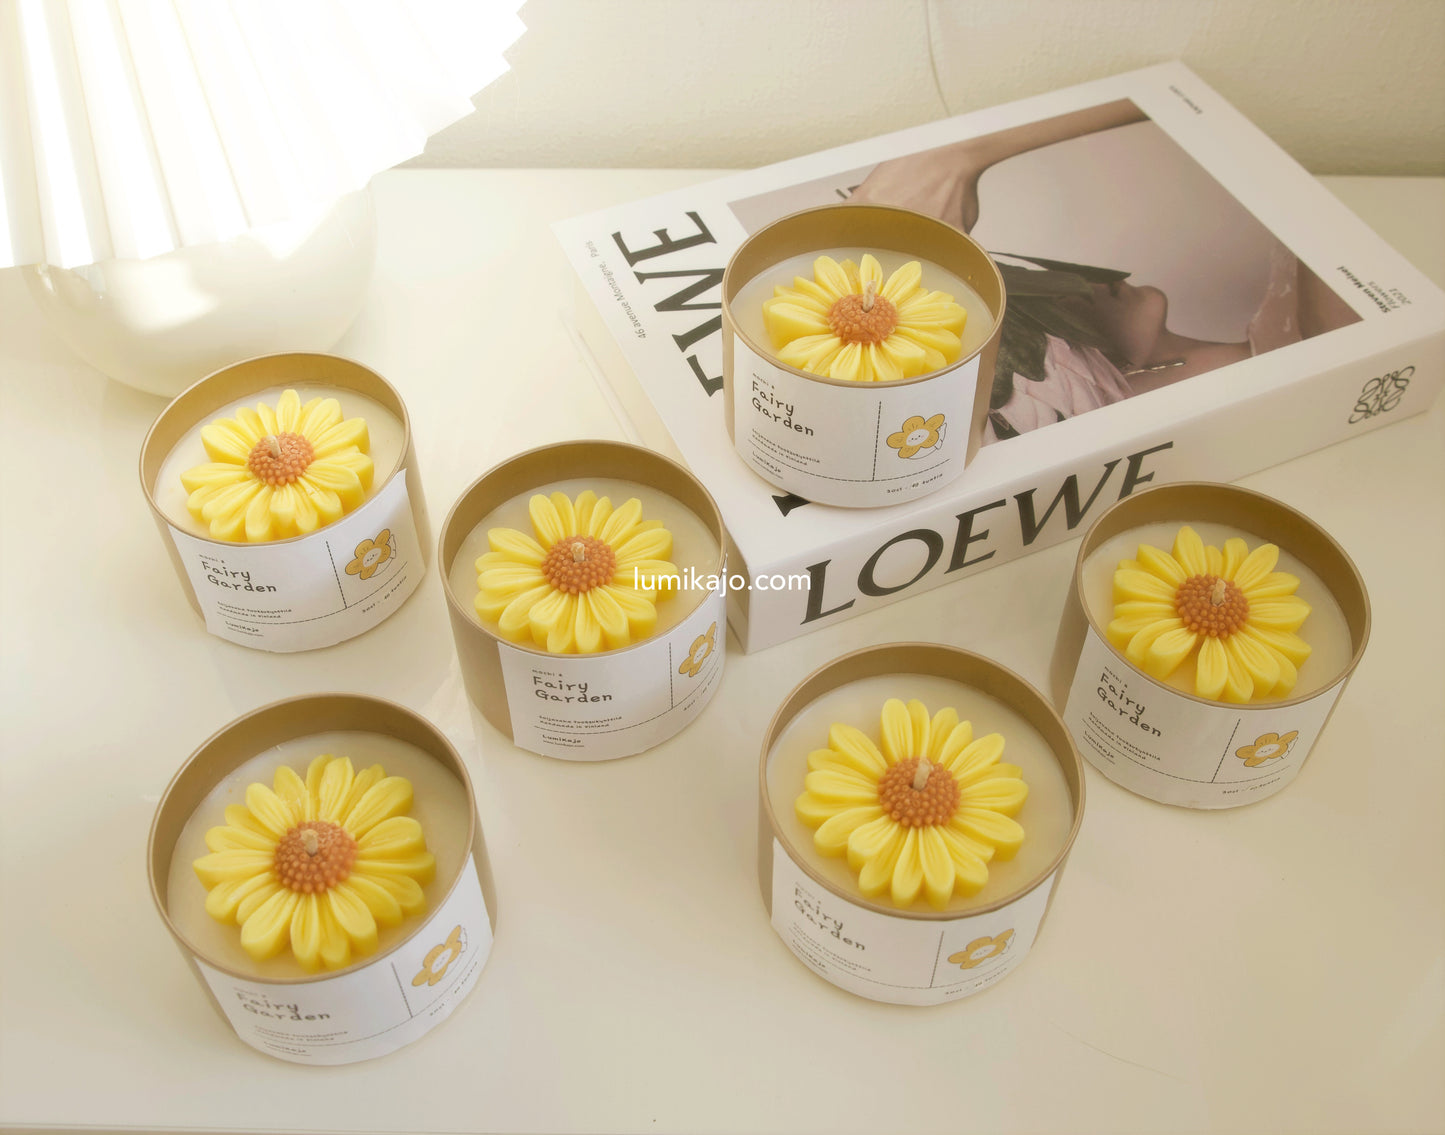 Daisy Flower Candles - Soywax Handmade in Finland